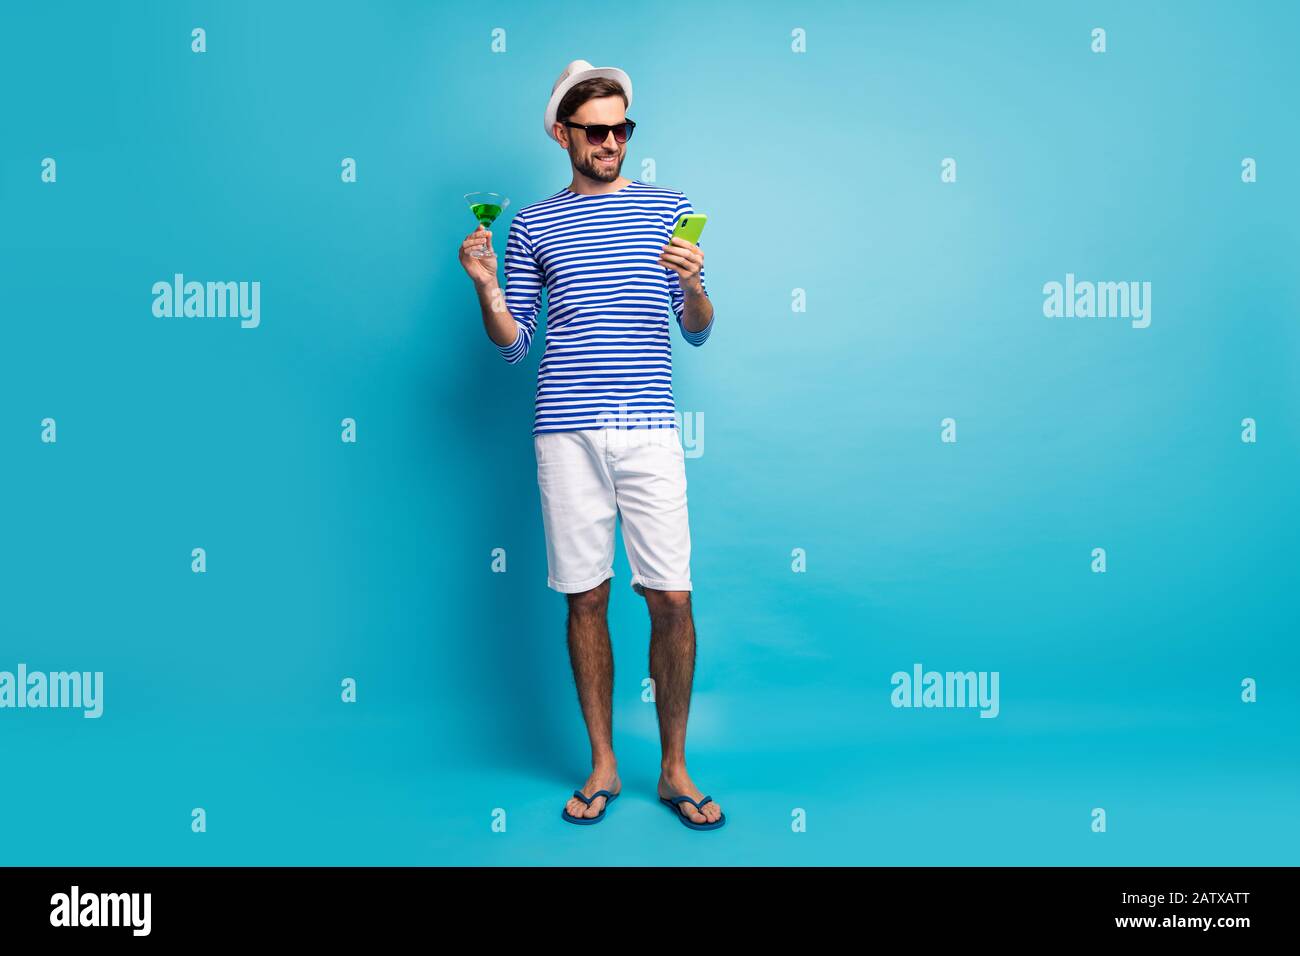 Full body photo of funky traveler guy browsing telephone drink green cocktail all inclusive resort wear sun specs striped sailor shirt cap shorts flip Stock Photo